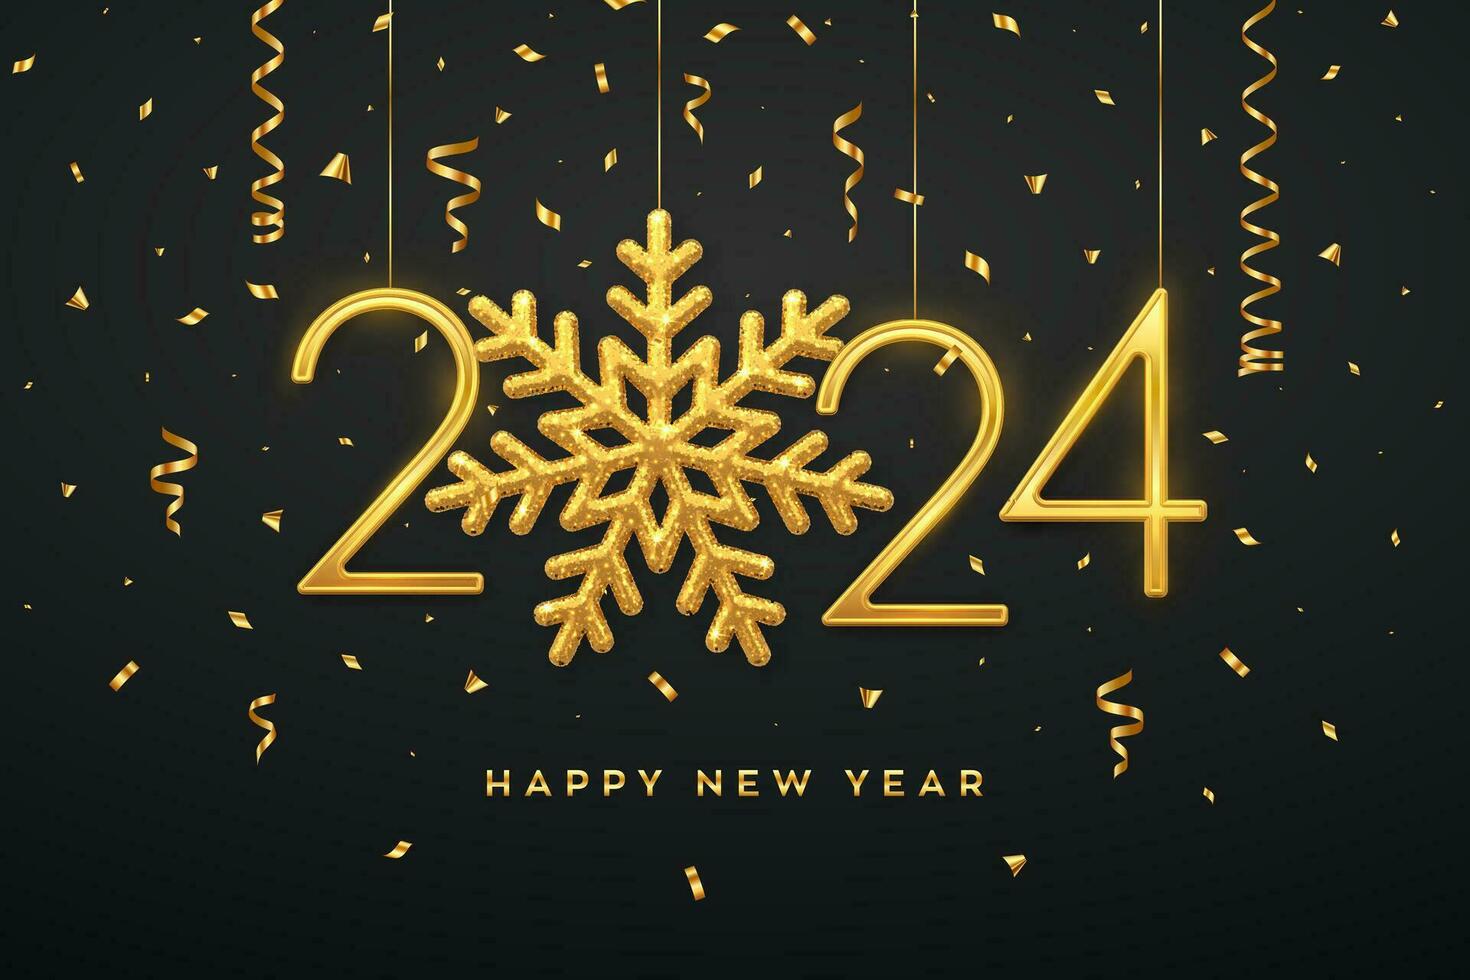 Happy New Year 2024. Hanging Golden metallic numbers 2024 with shining snowflake and confetti on black background. New Year greeting card or banner template. Holiday decoration. Vector illustration.